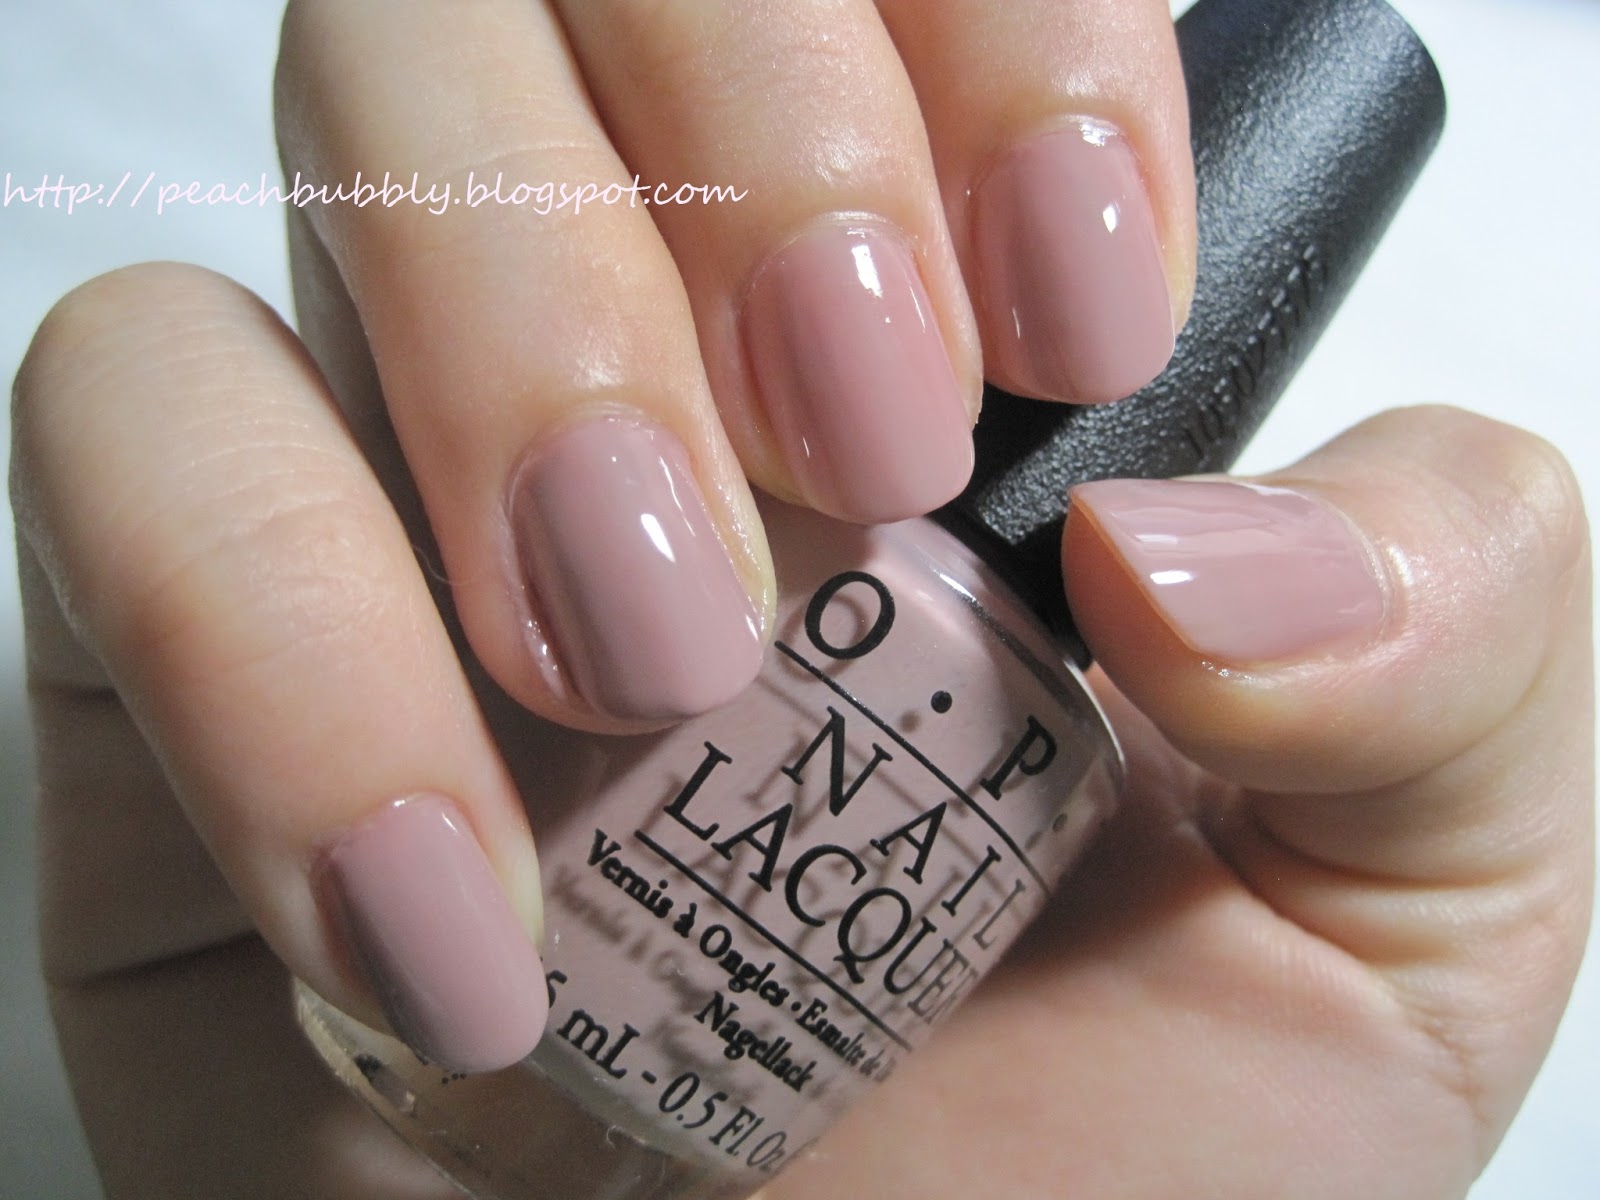 Today I have a very nice nude color from OPI called Tickle My France-y. 